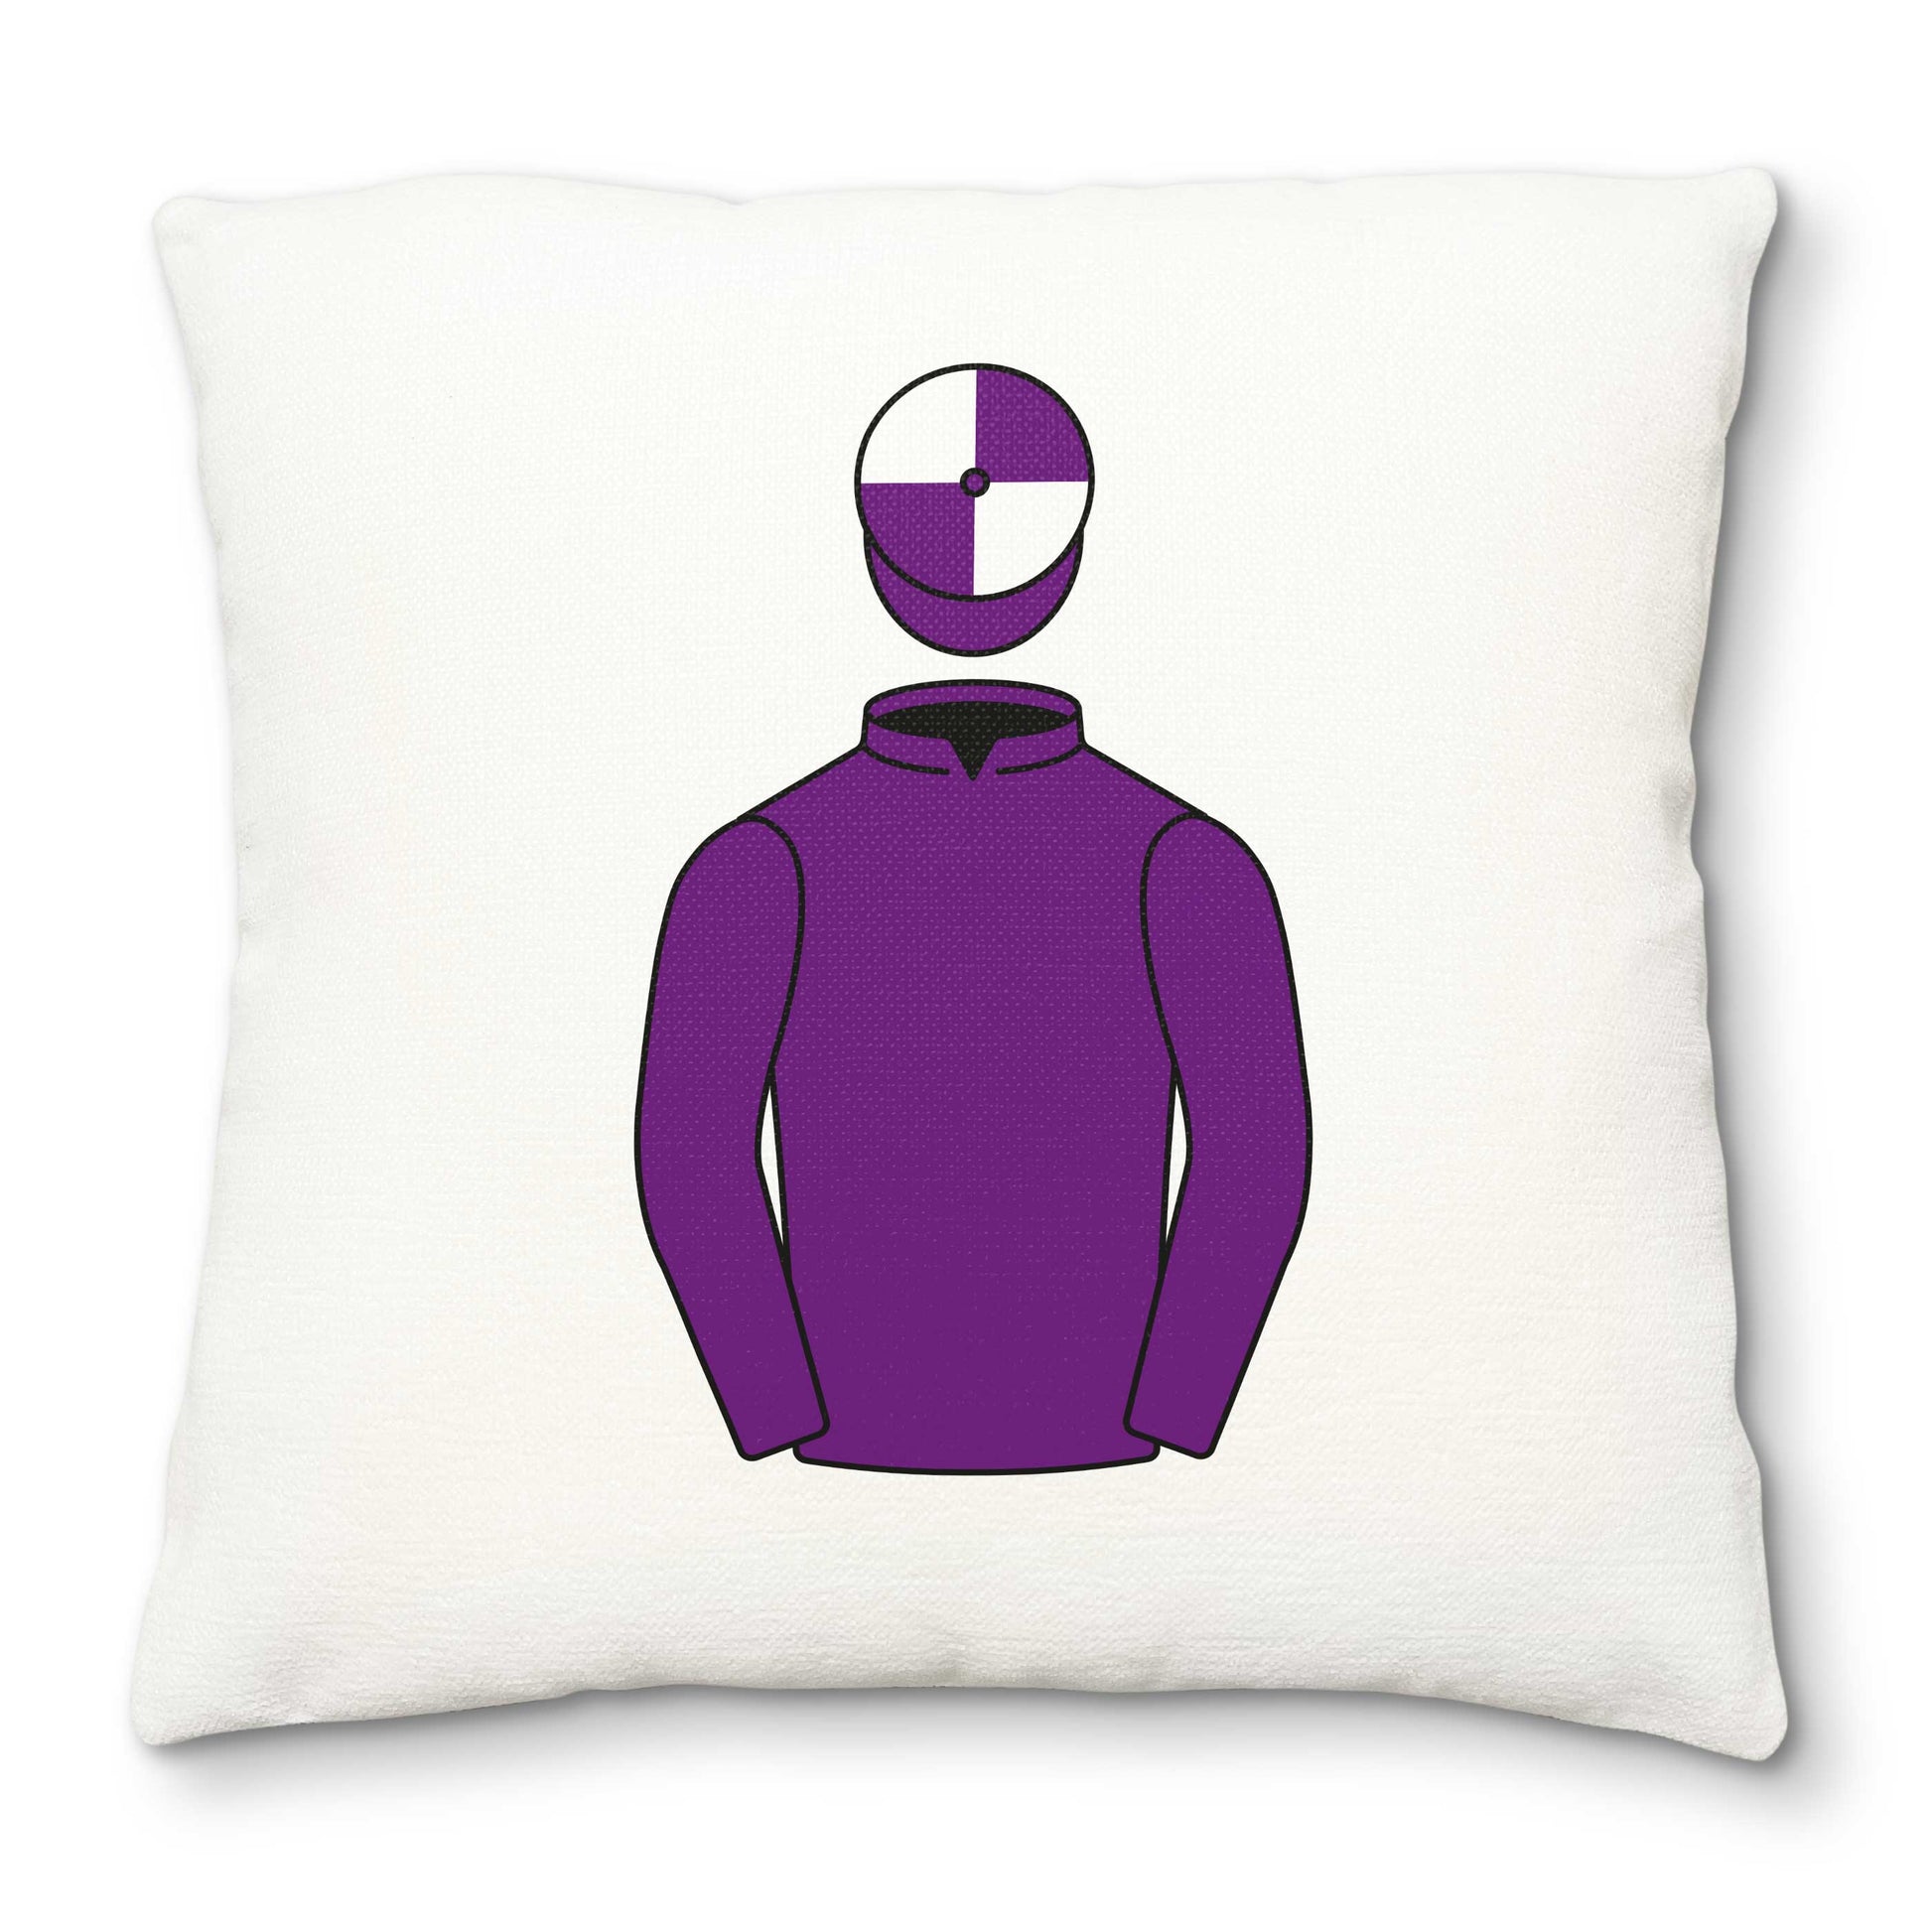 Amo Racing Limited Deluxe Cushion Cover - Deluxe Cushion Cover - Hacked Up